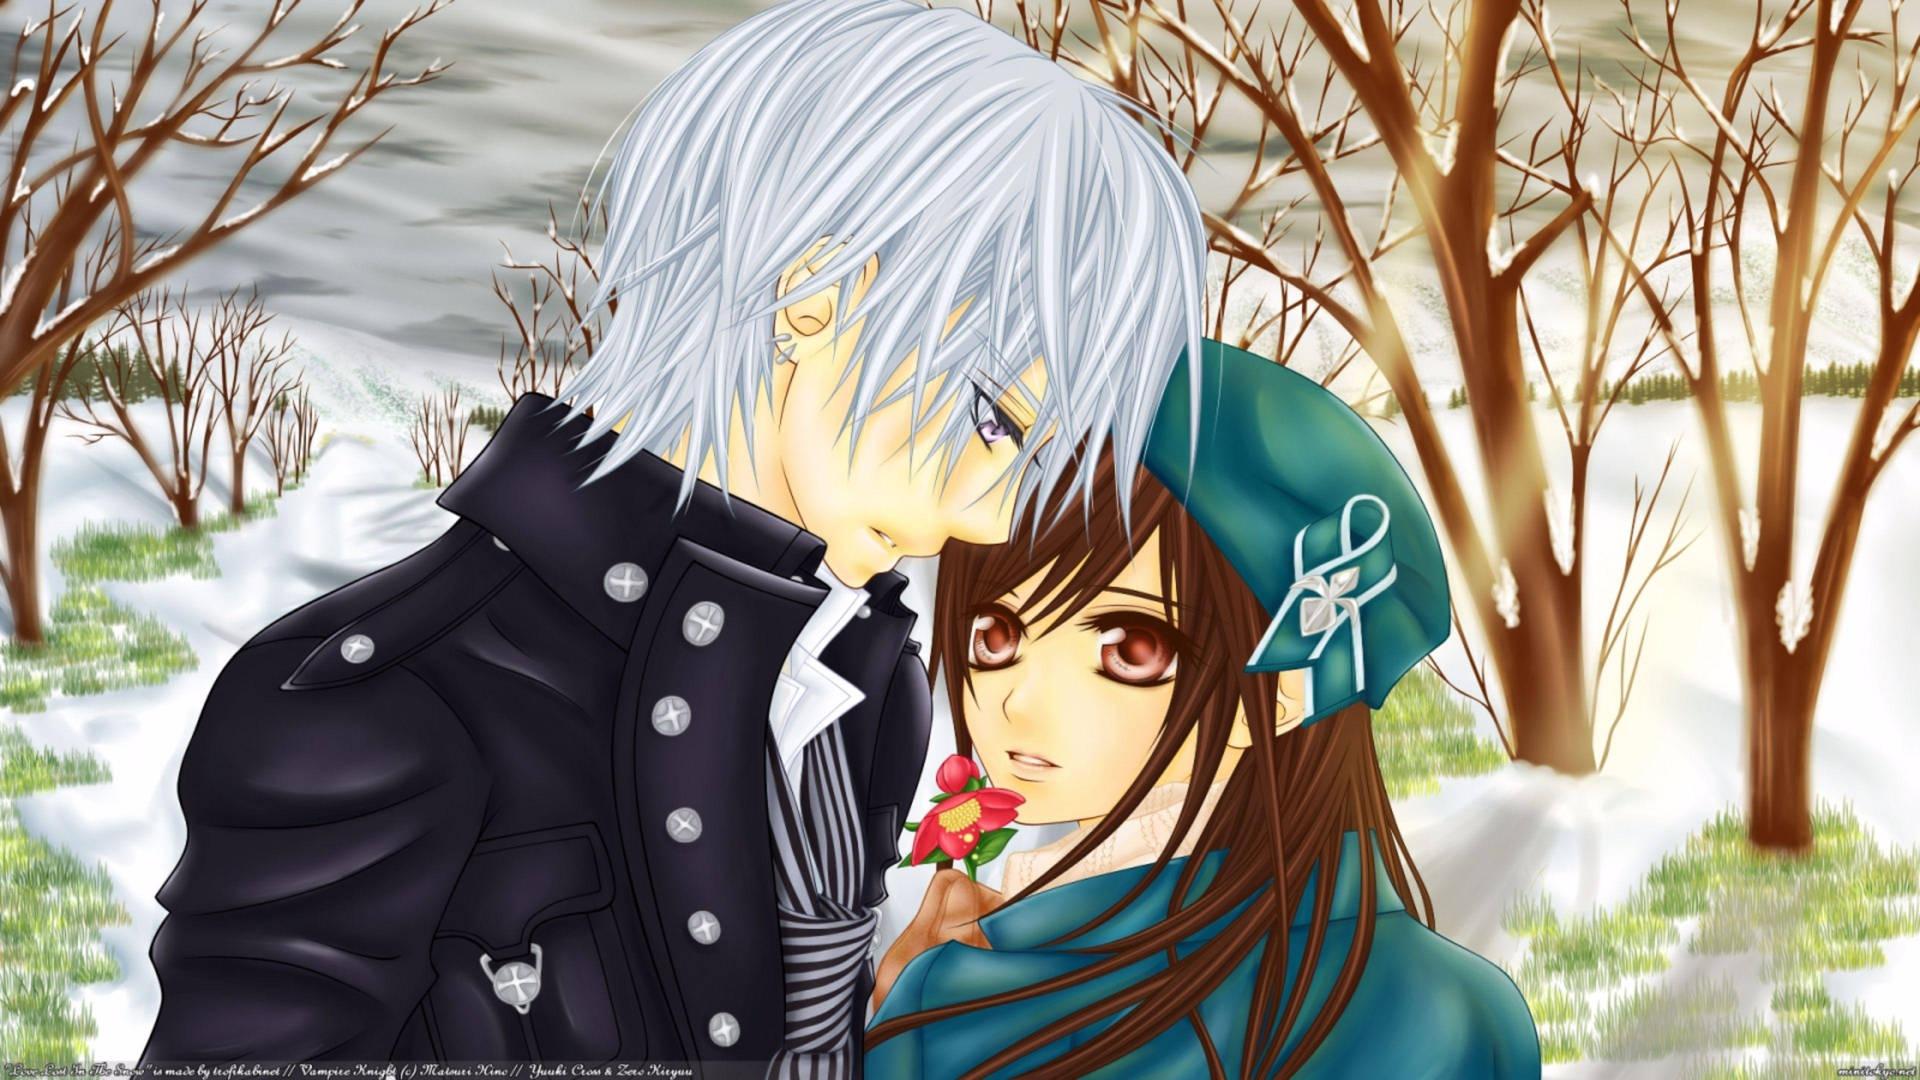 Caption: Romantic Anime Couple Embracing In The Fall Season Background